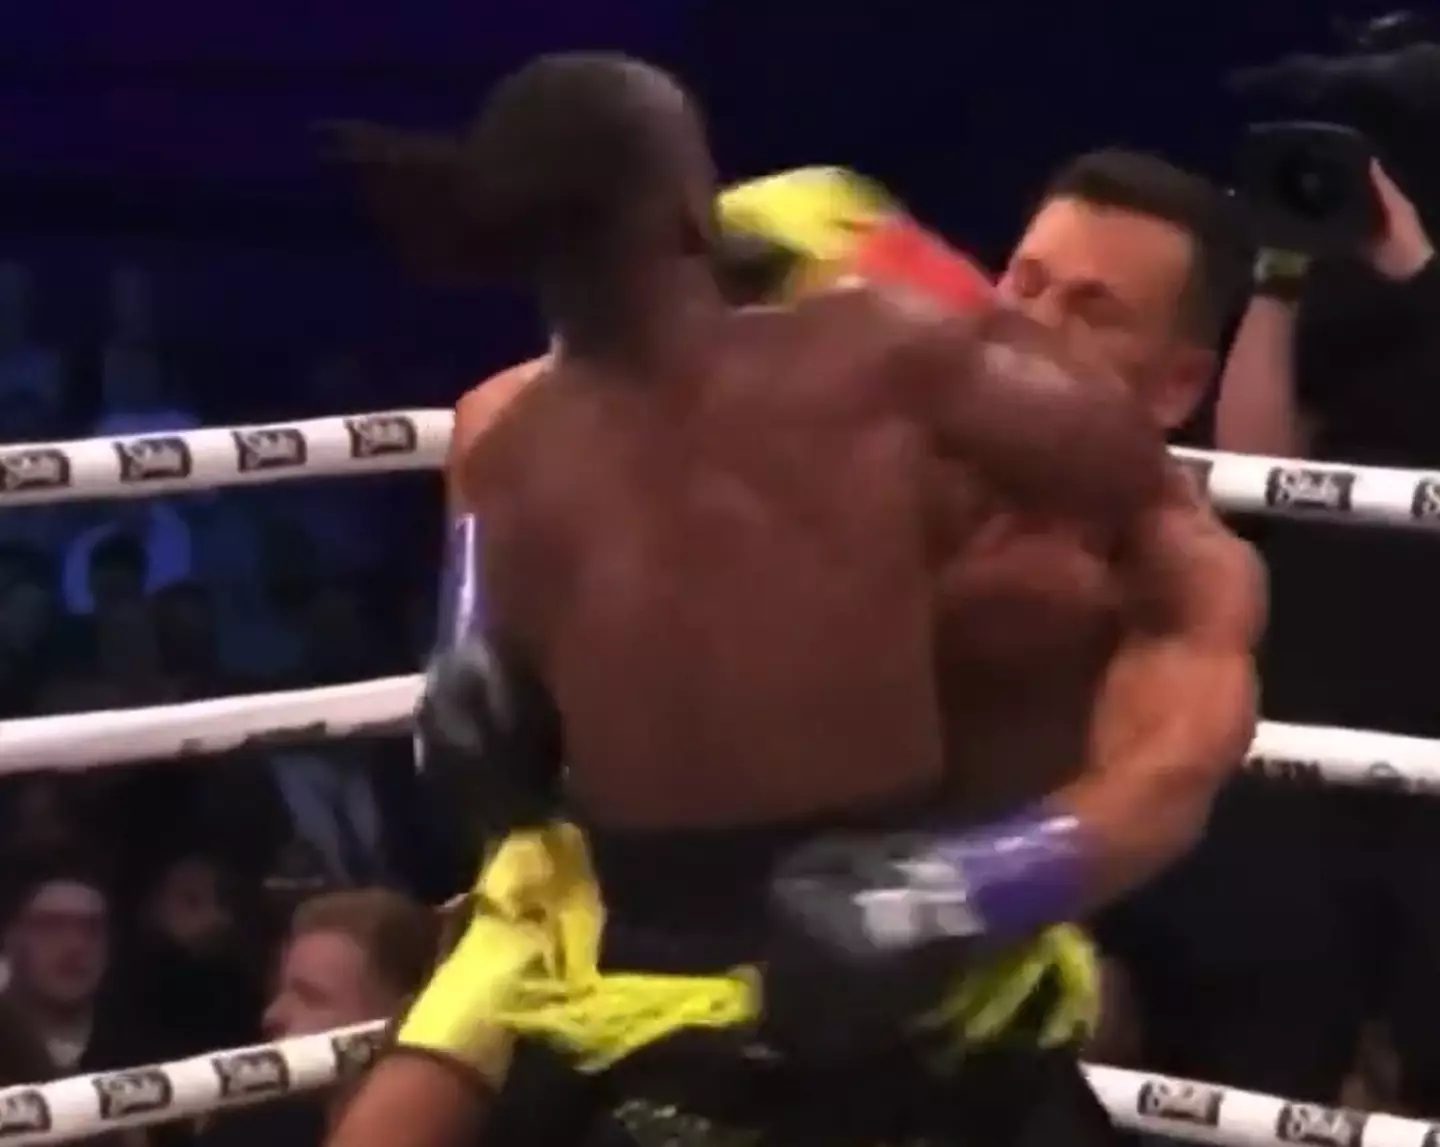 KSI's final blow against Fournier appeared to be an elbow to the face.